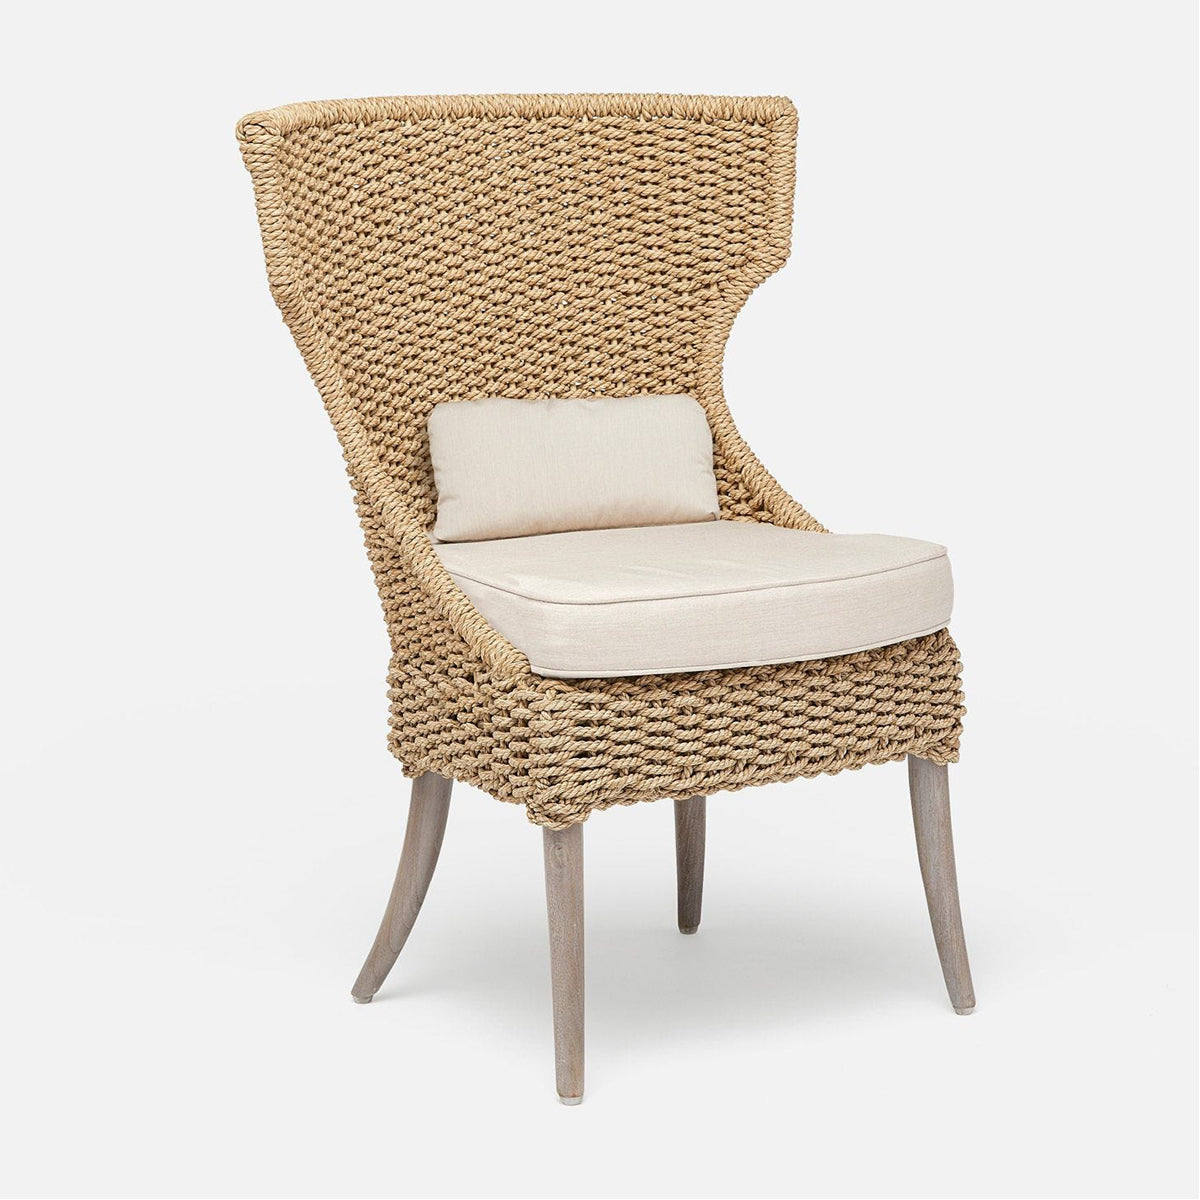 Made Goods Arla Faux Rope Outdoor Dining Chair in Volta Fabric